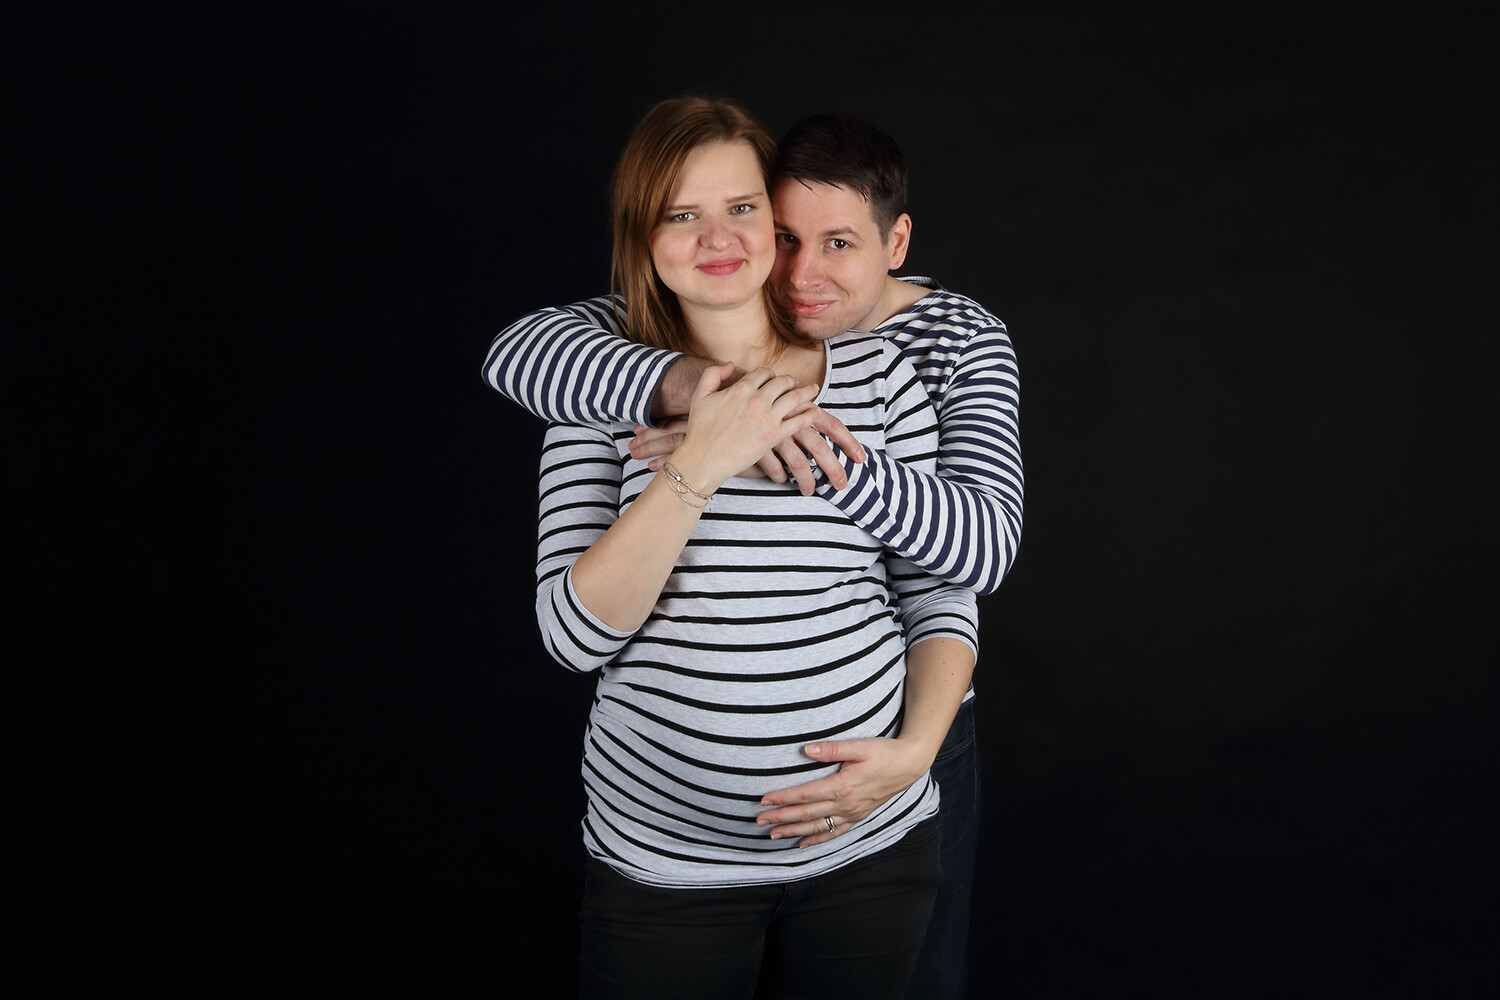 couple maternity photo in striped shirts on a dark background